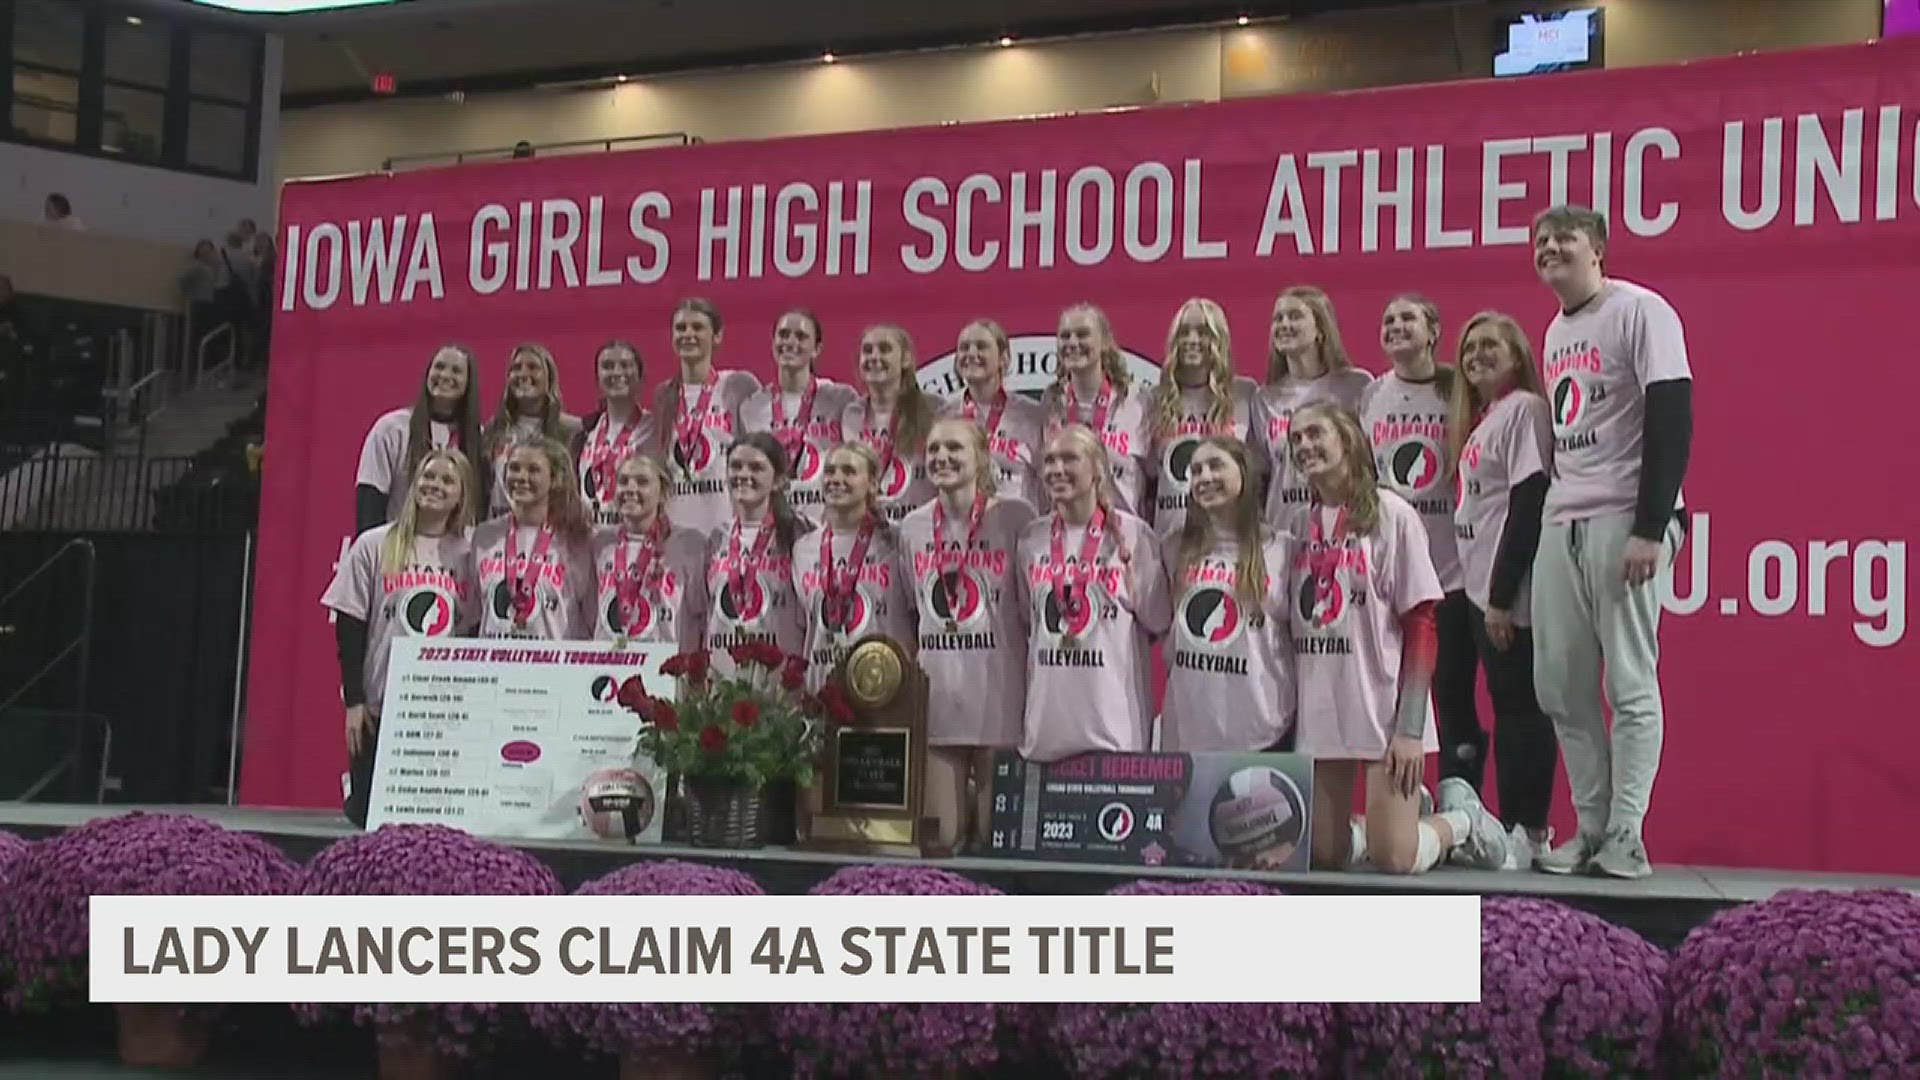 It's the first time the Lady Lancers have claimed a state title in almost 40 years.